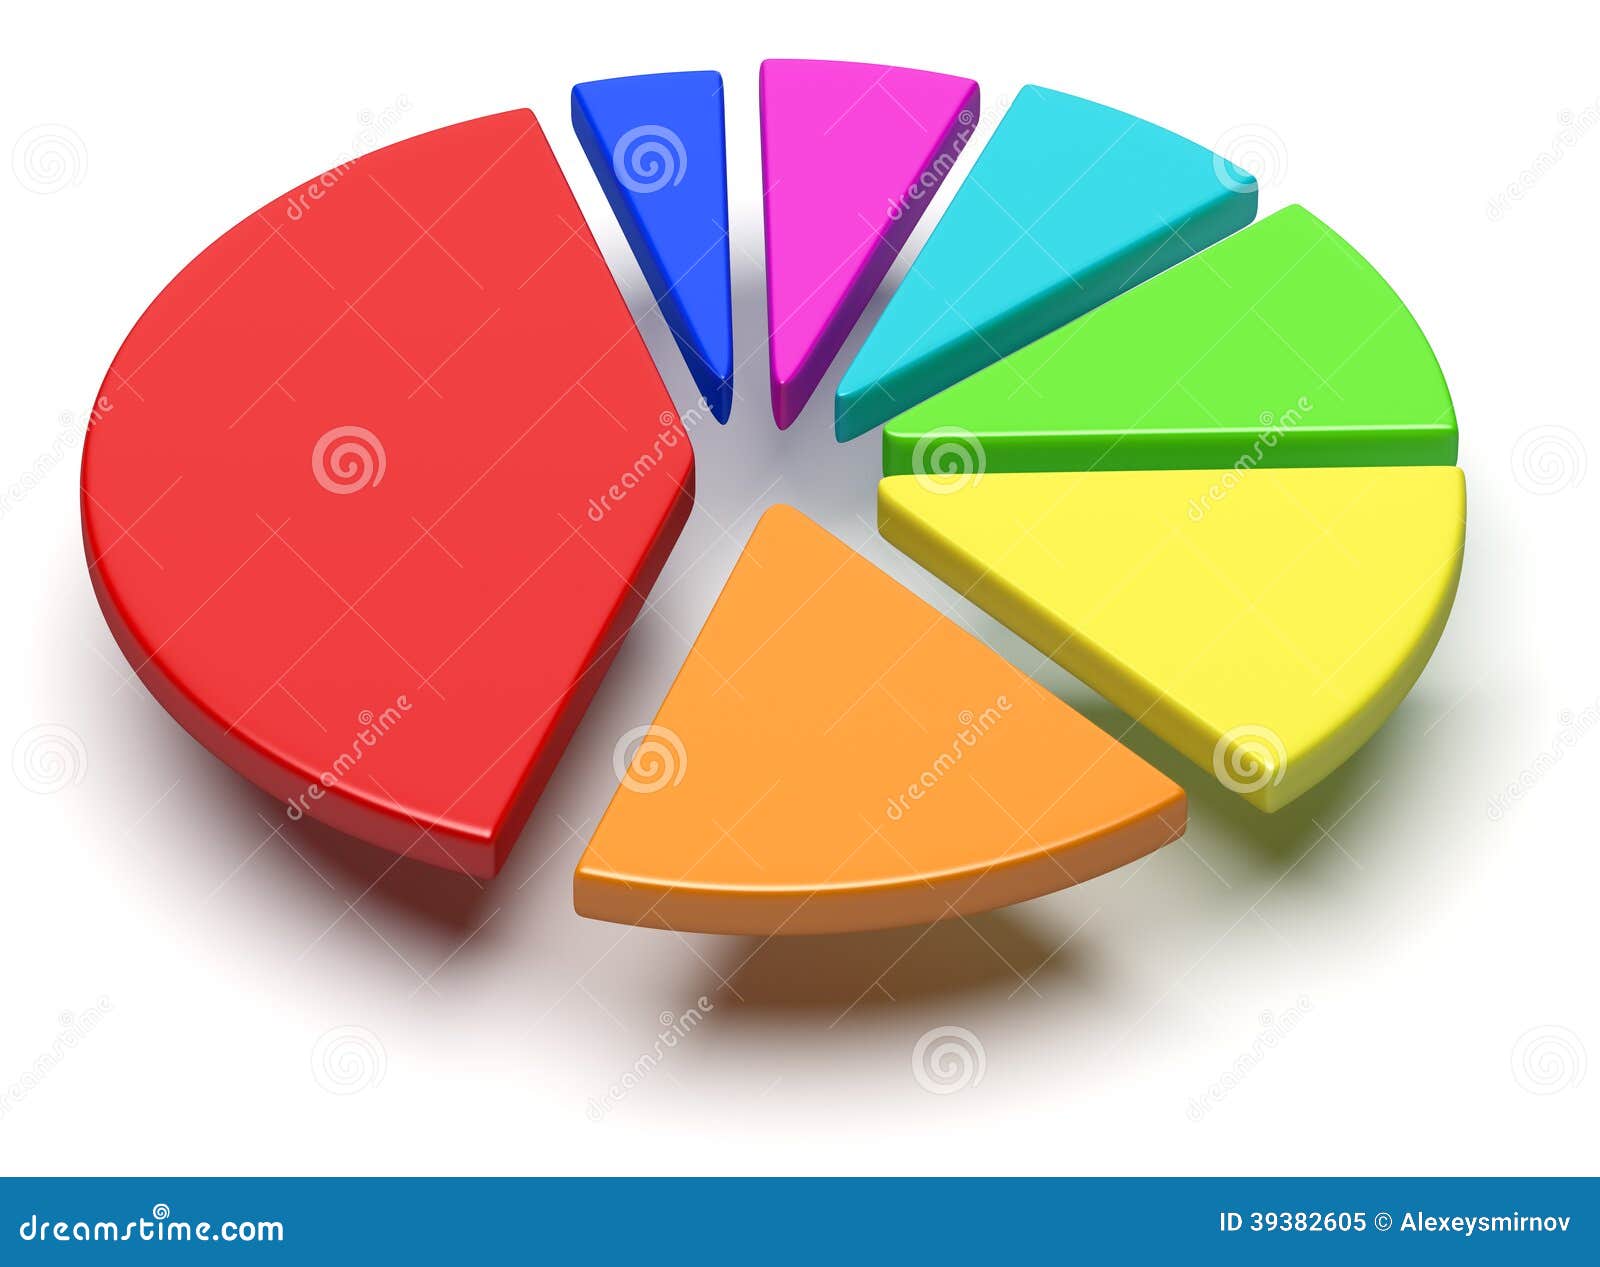 https://thumbs.dreamstime.com/z/colorful-pie-chart-flying-separated-segments-abstract-business-statistics-financial-analysis-growth-development-concept-d-39382605.jpg